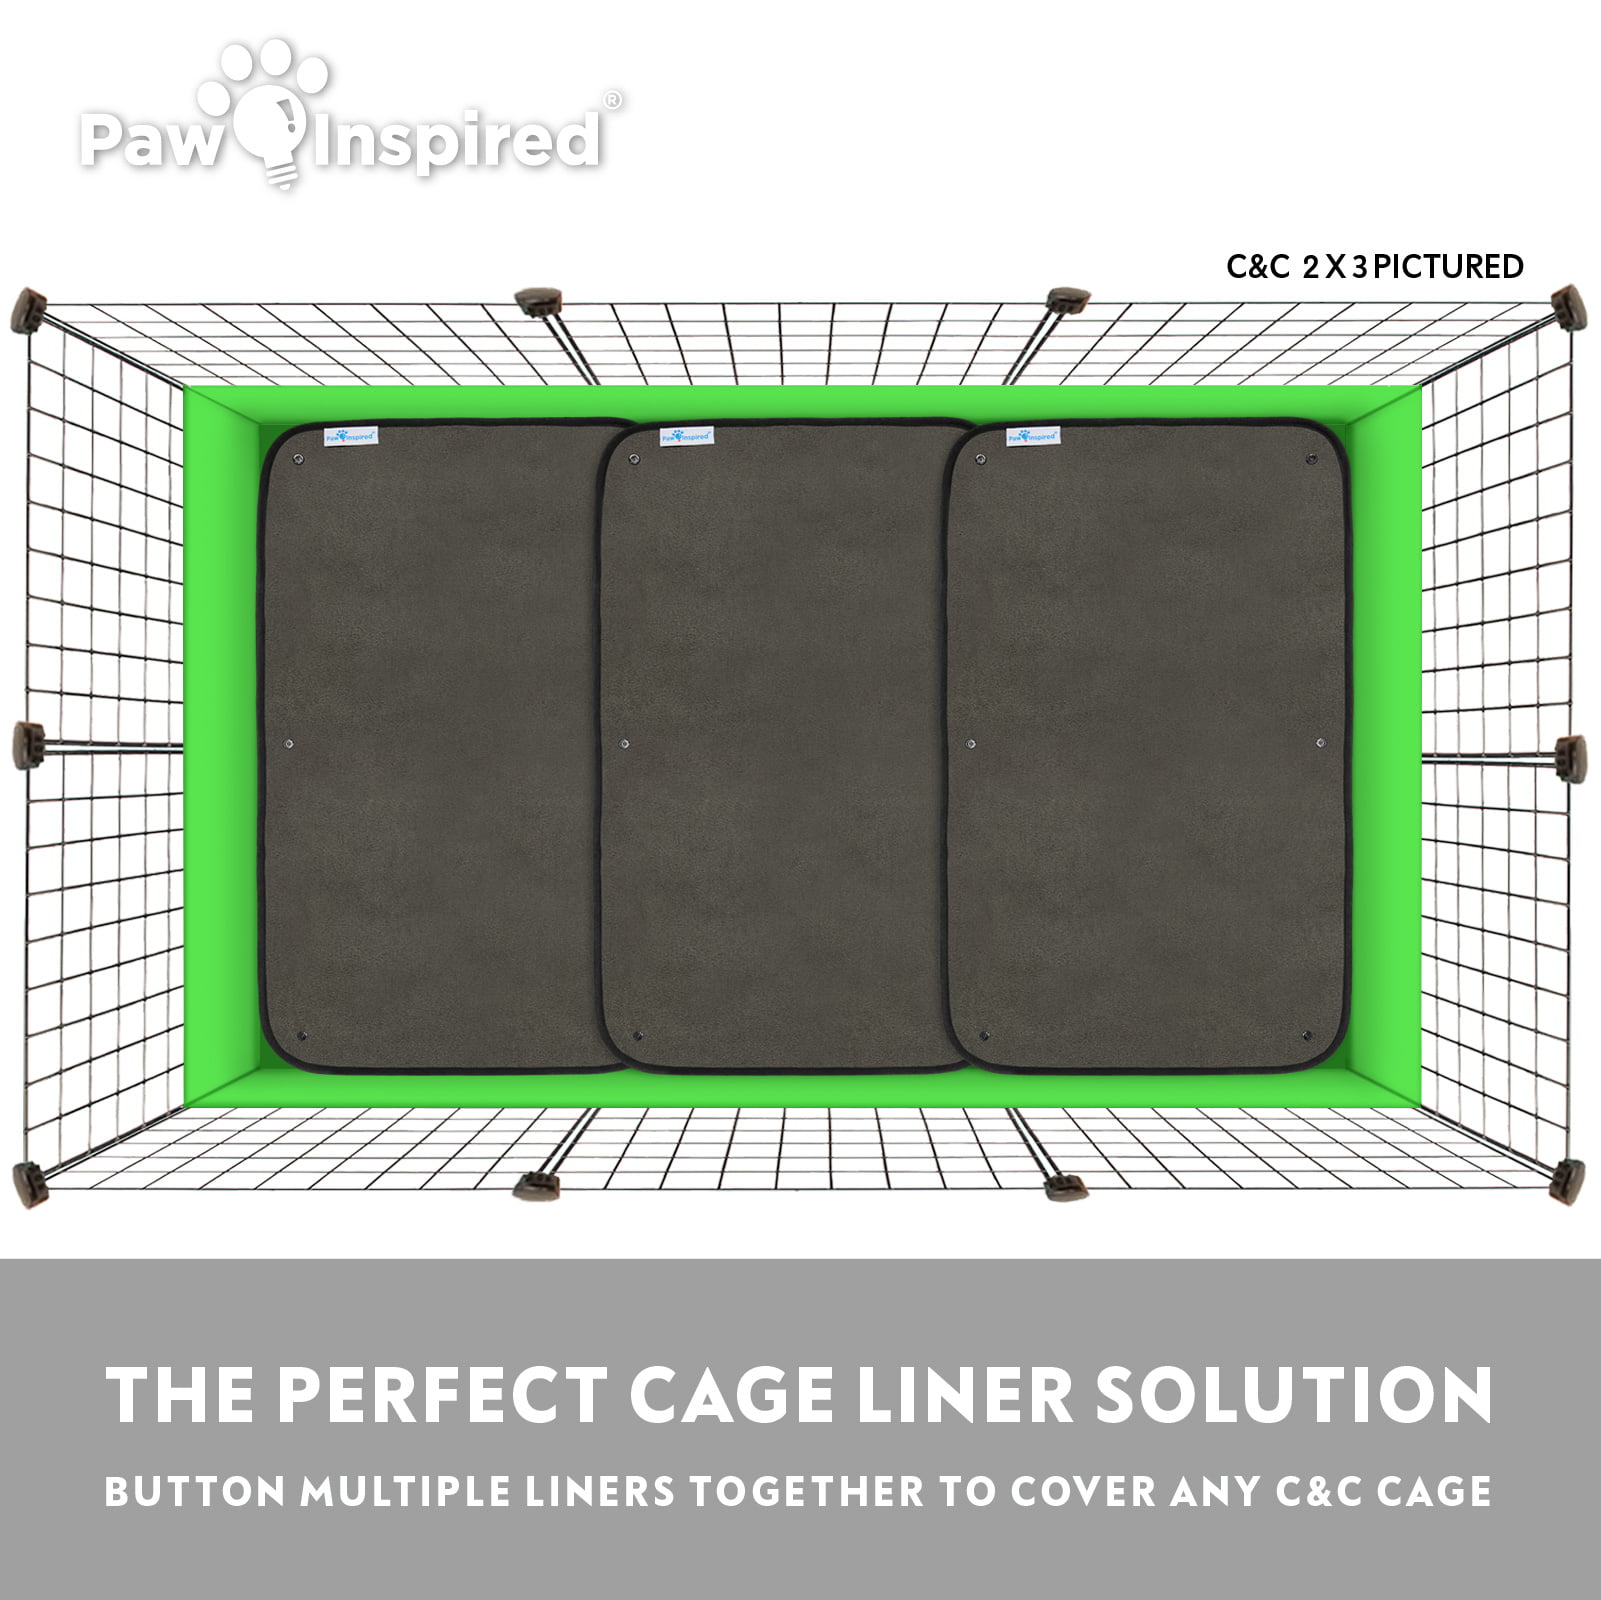 C&C 2 x 1 Rabbits , 8 Count Bamboo Charcoal Odor Controlling 28 x 17 and Small Animals Paw Inspired Disposable Guinea Pig Cage Liners Super Absorbent Liners Pee Pads for Ferrets Hamsters